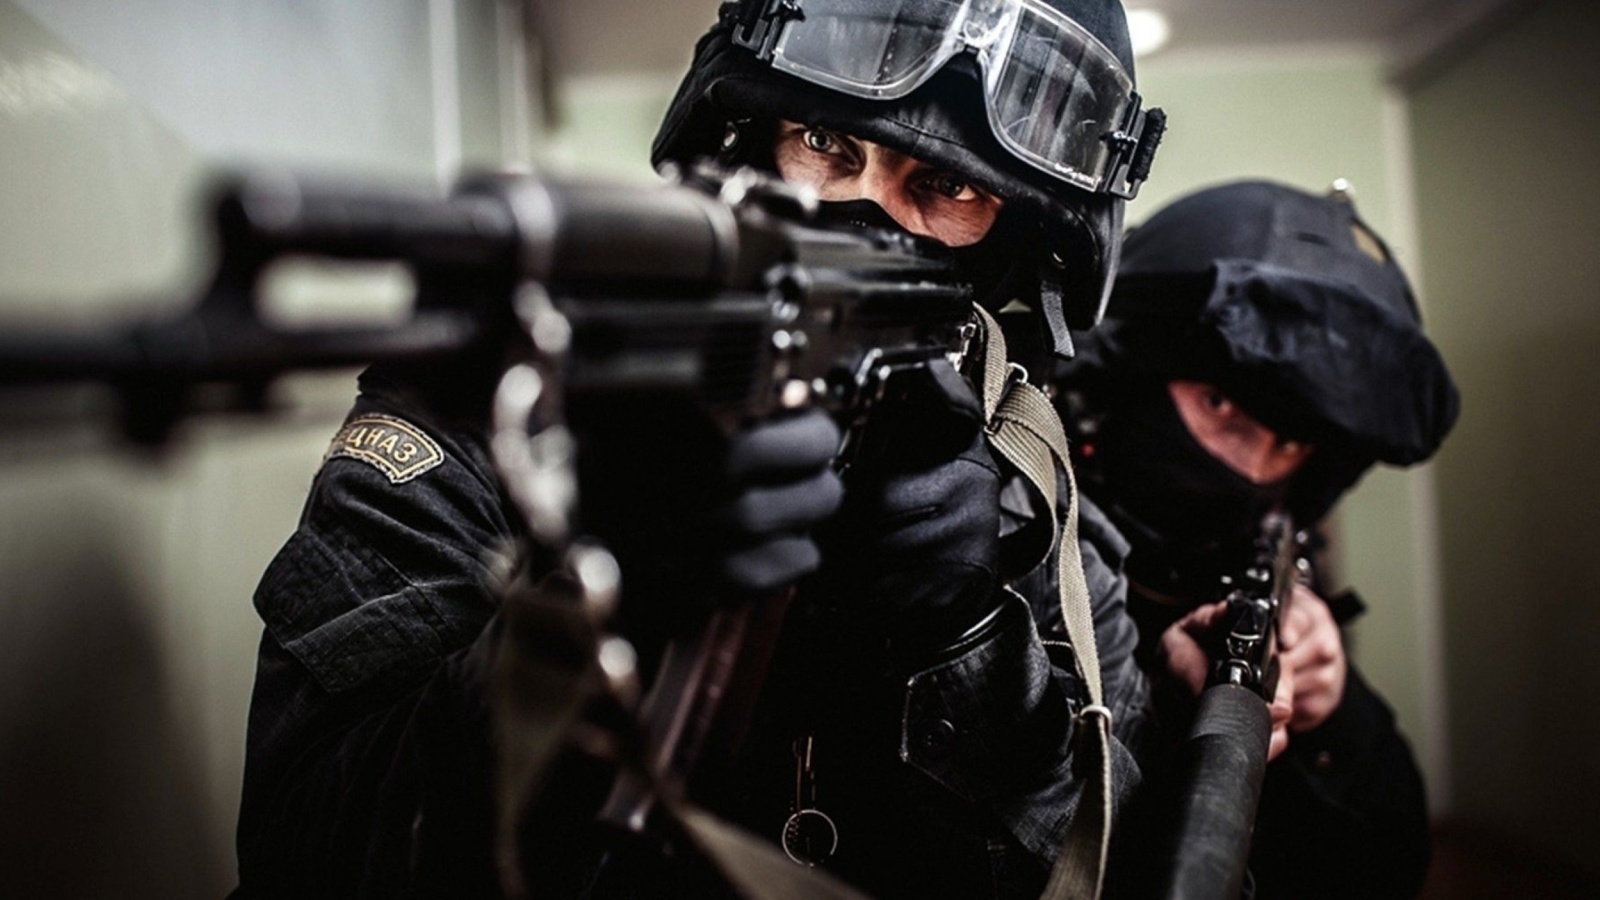 Das Police special forces Wallpaper 1600x900